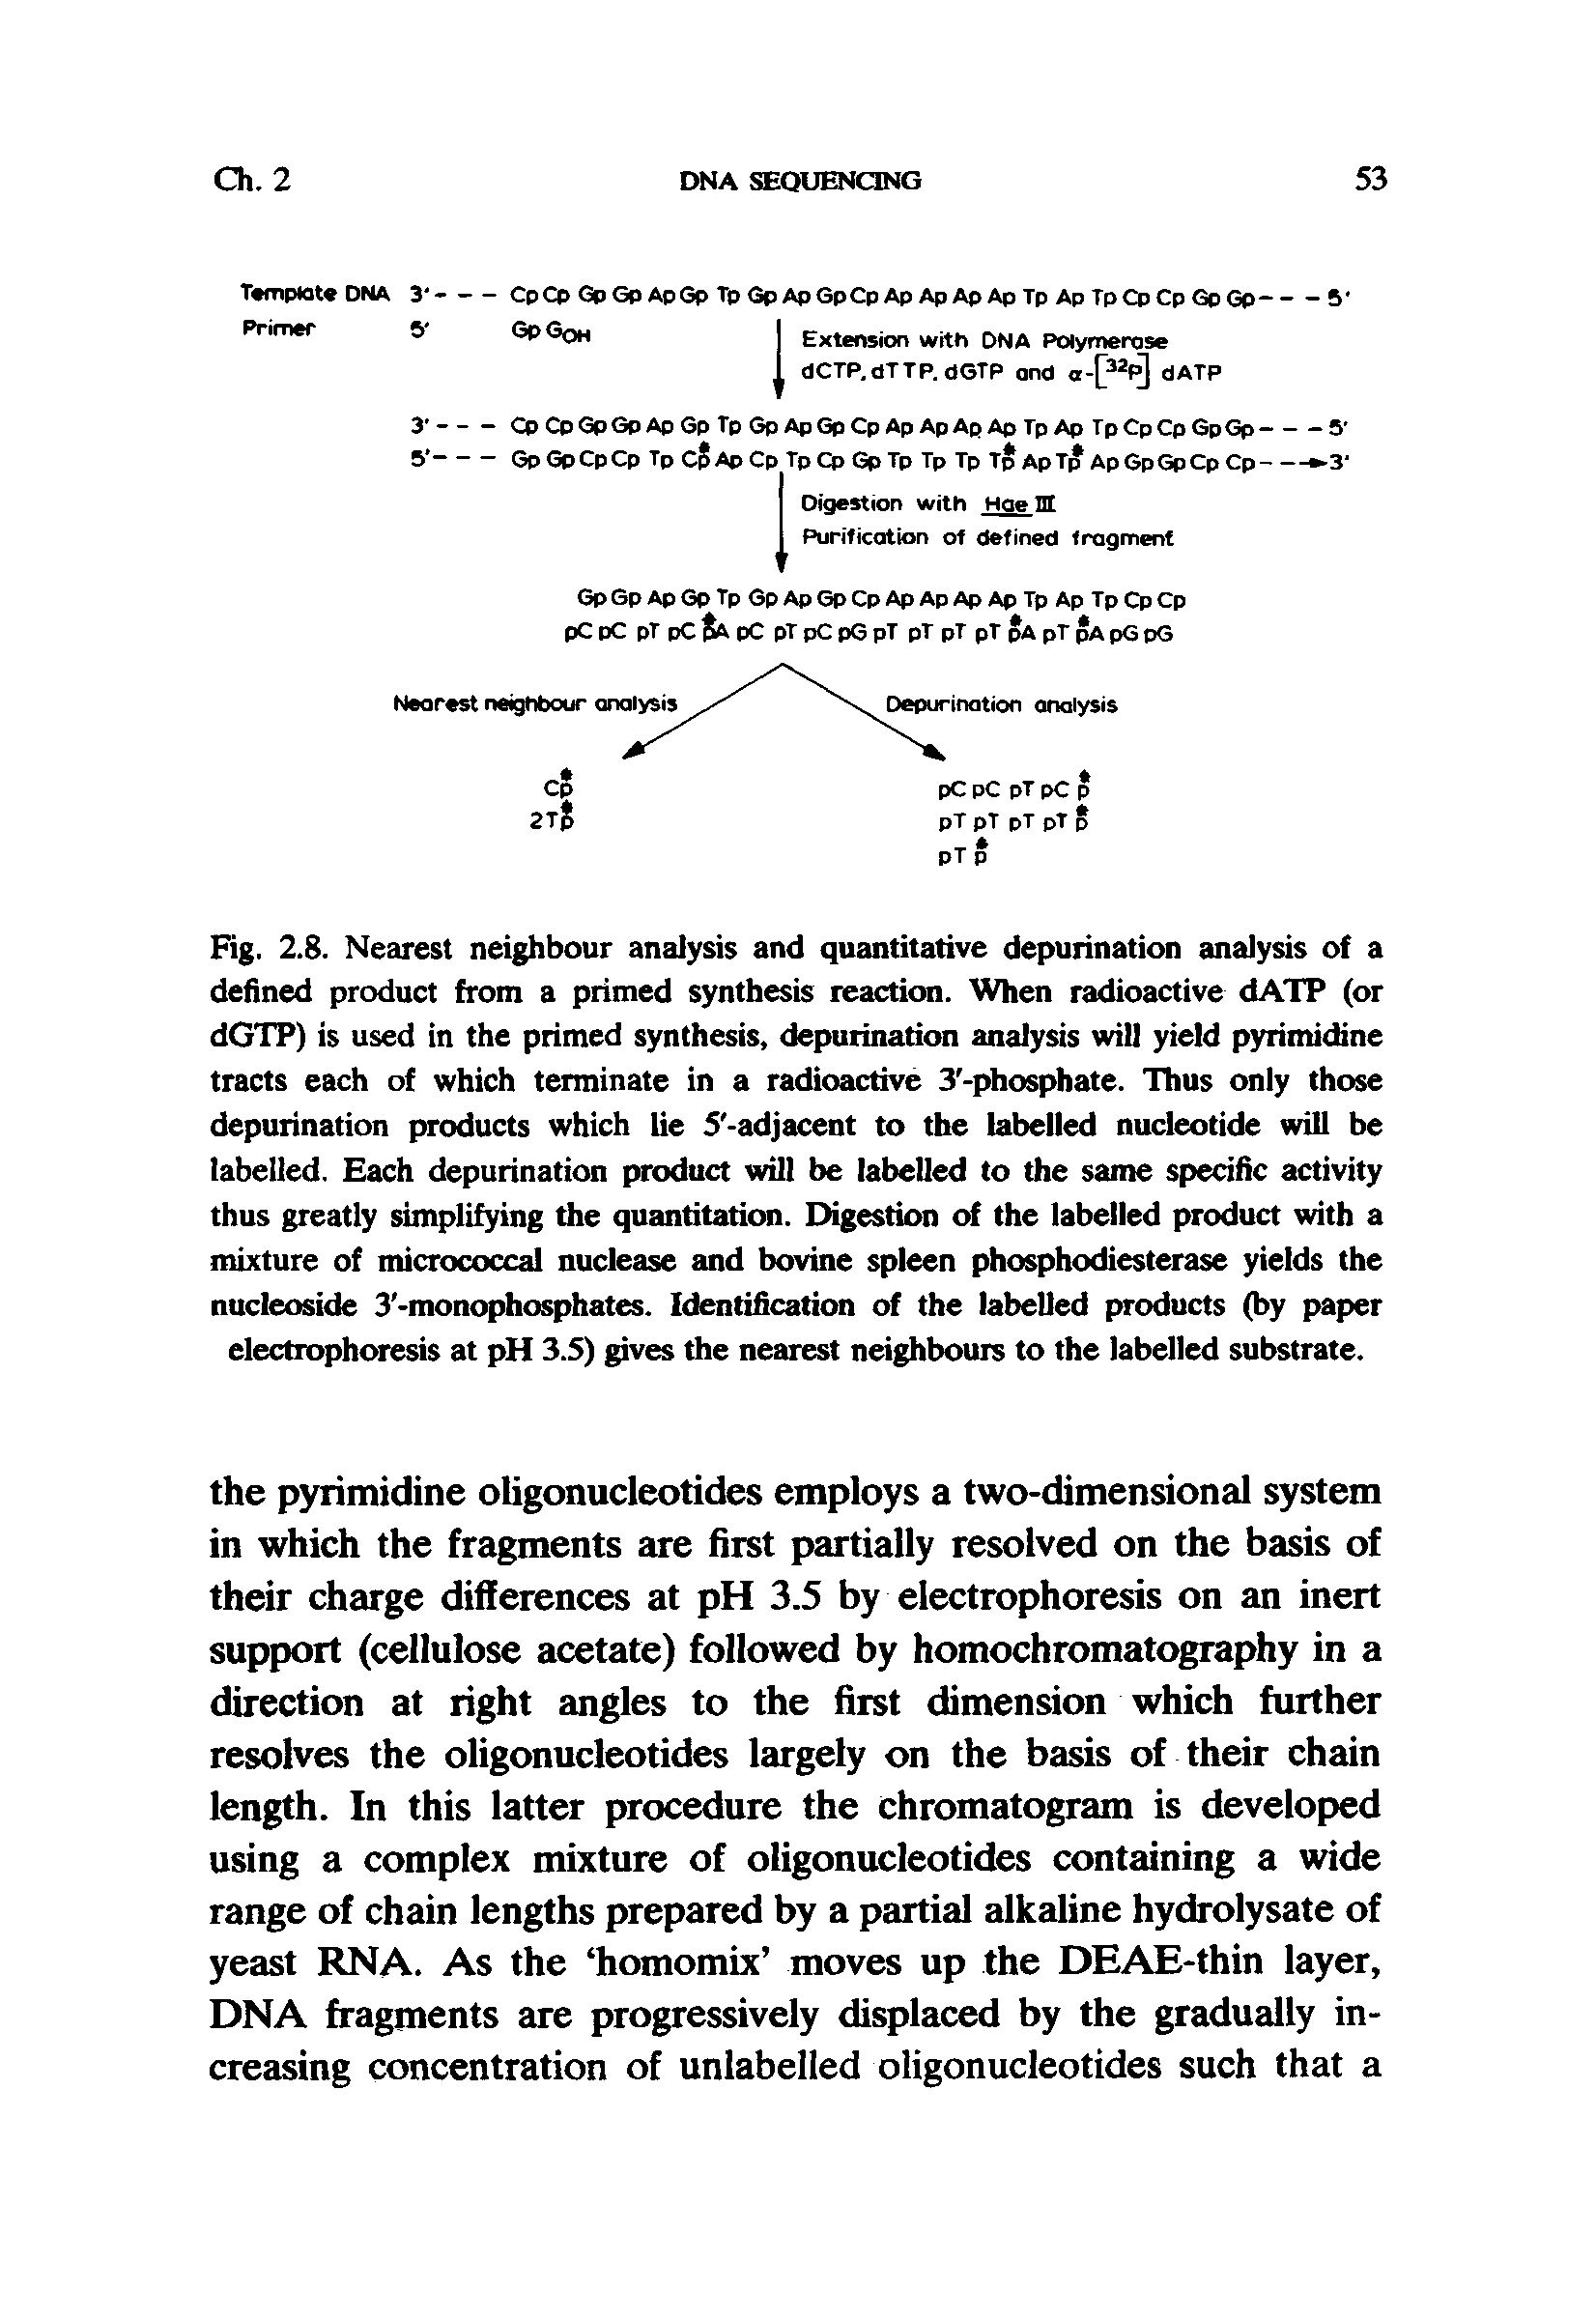 Fig. 2.8. Nearest neighbour analysis and quantitative depurination analysis of a defined product from a primed synthesis reaction. When radioactive dATP (or dGTP) is used in the primed synthesis, depurination analysis will yield pyrimidine tracts each of which terminate in a radioactive 3 -phosphate. Thus only those depurination products which lie 5 -adjacent to the labelled nucleotide will be labelled. Each depurination product will be labelled to the same specific activity thus greatly simplifying the quantitation. Digestion of the labelled product with a mixture of micrococcal nuclease and bovine spleen phosphodiesterase yields the nucleoside 3 -monophosphates. Identification of the labelled products (by paper electrophoresis at pH 3.S) gives the nearest neighbours to the labelled substrate.